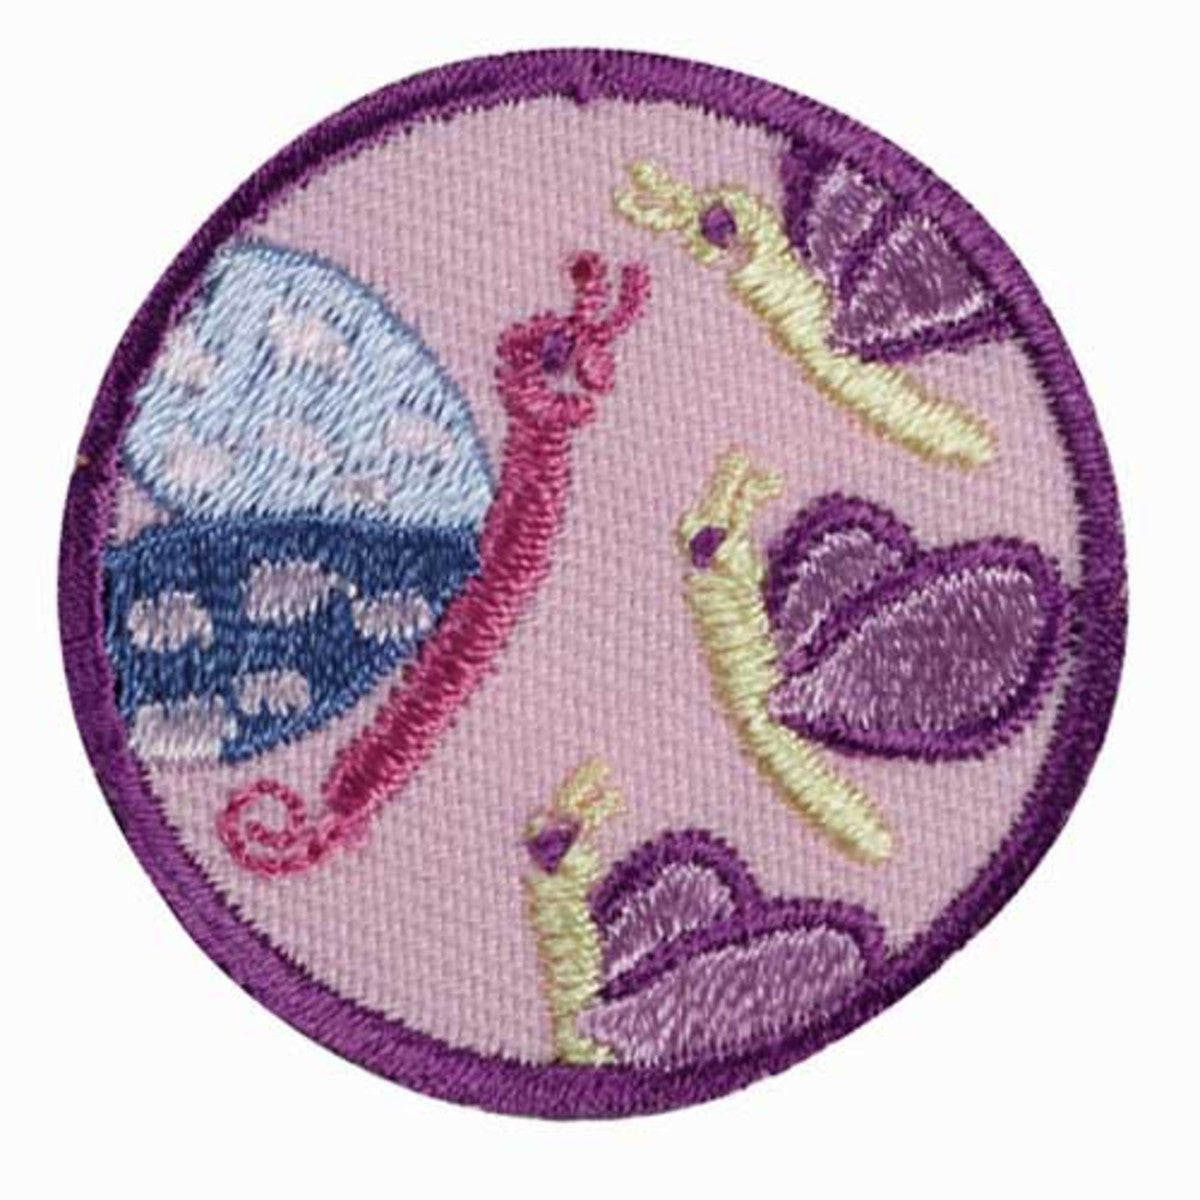 Girl Scouts Junior Social Butterfly Badge - Basics Clothing Store